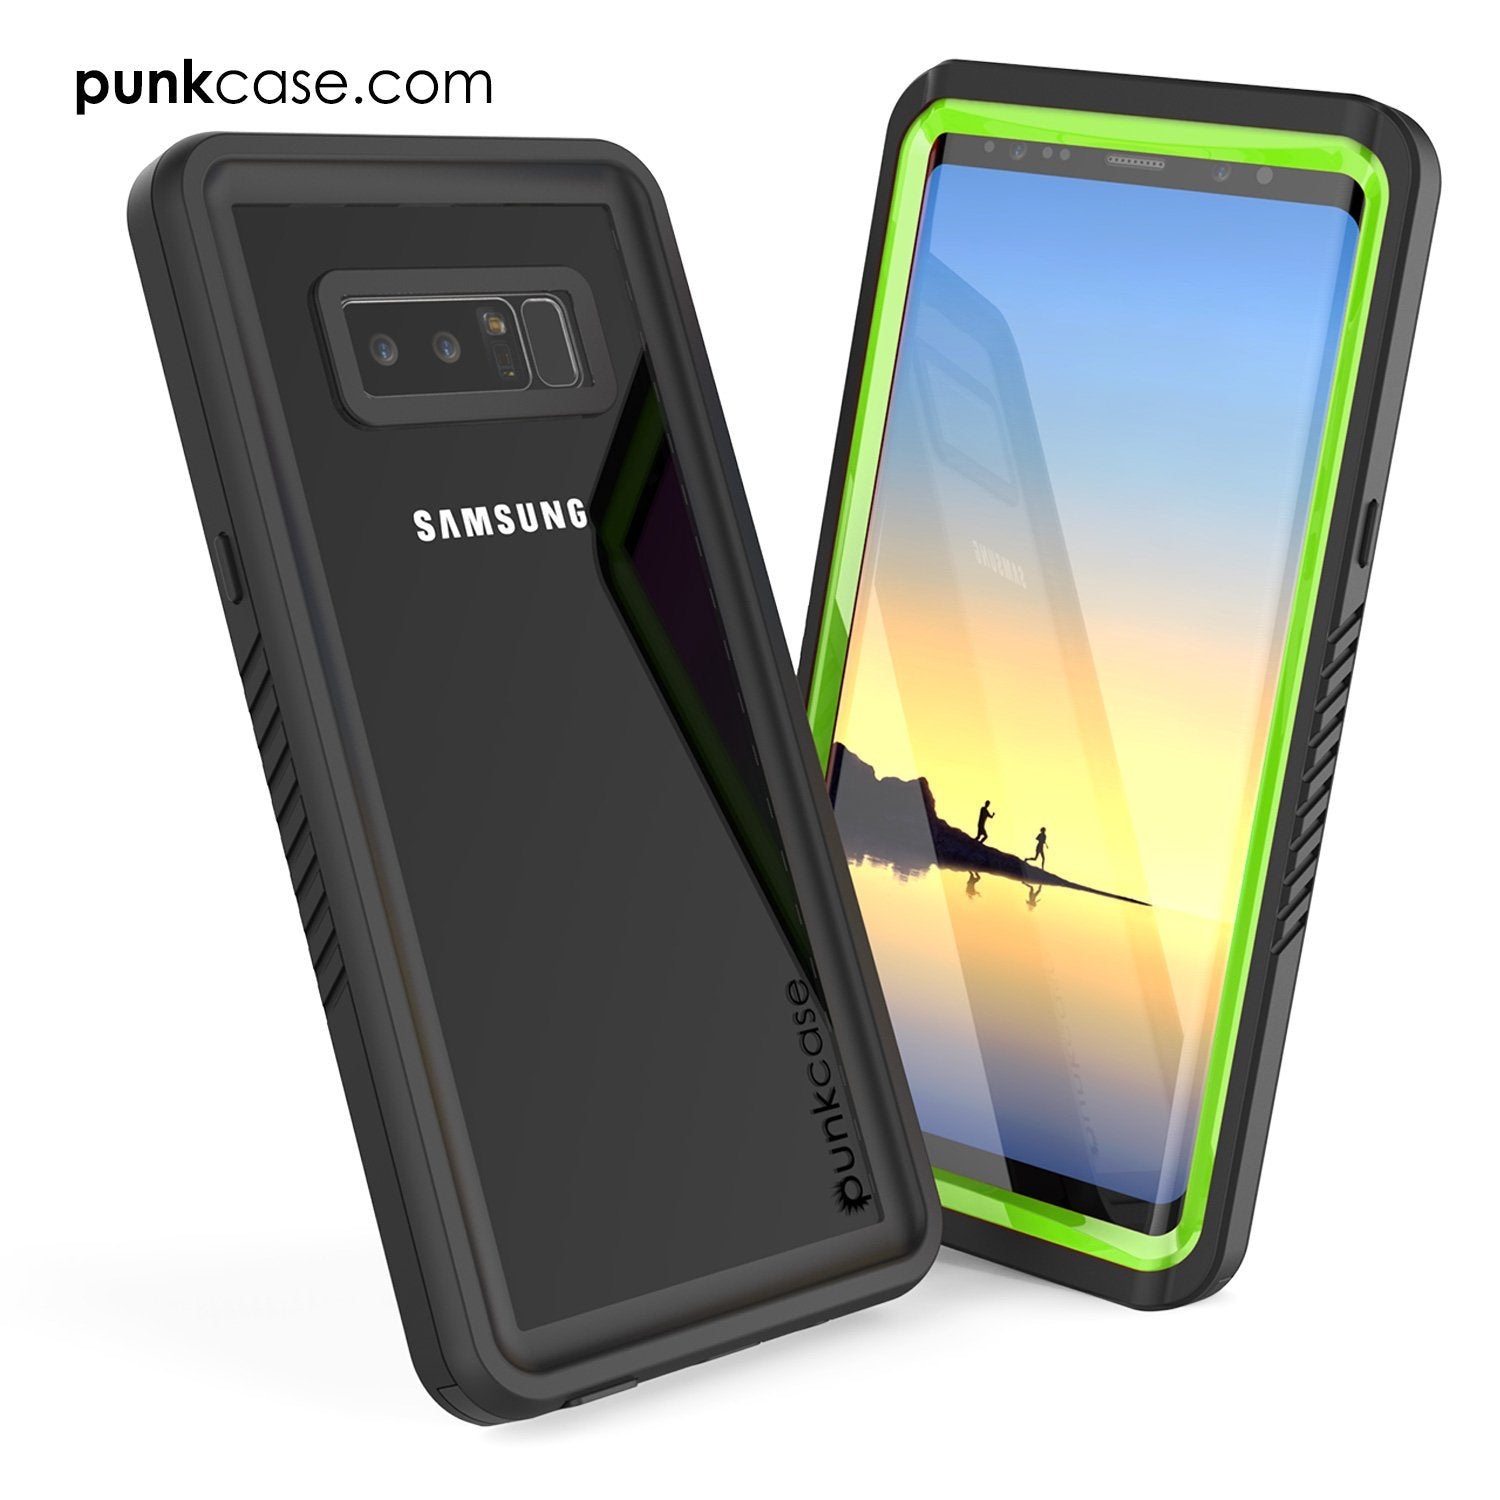 Galaxy Note 8 Case, Punkcase [Extreme Series] [Slim Fit] [IP68 Certified] [Shockproof] Armor Cover W/ Built In Screen Protector [Light Green]